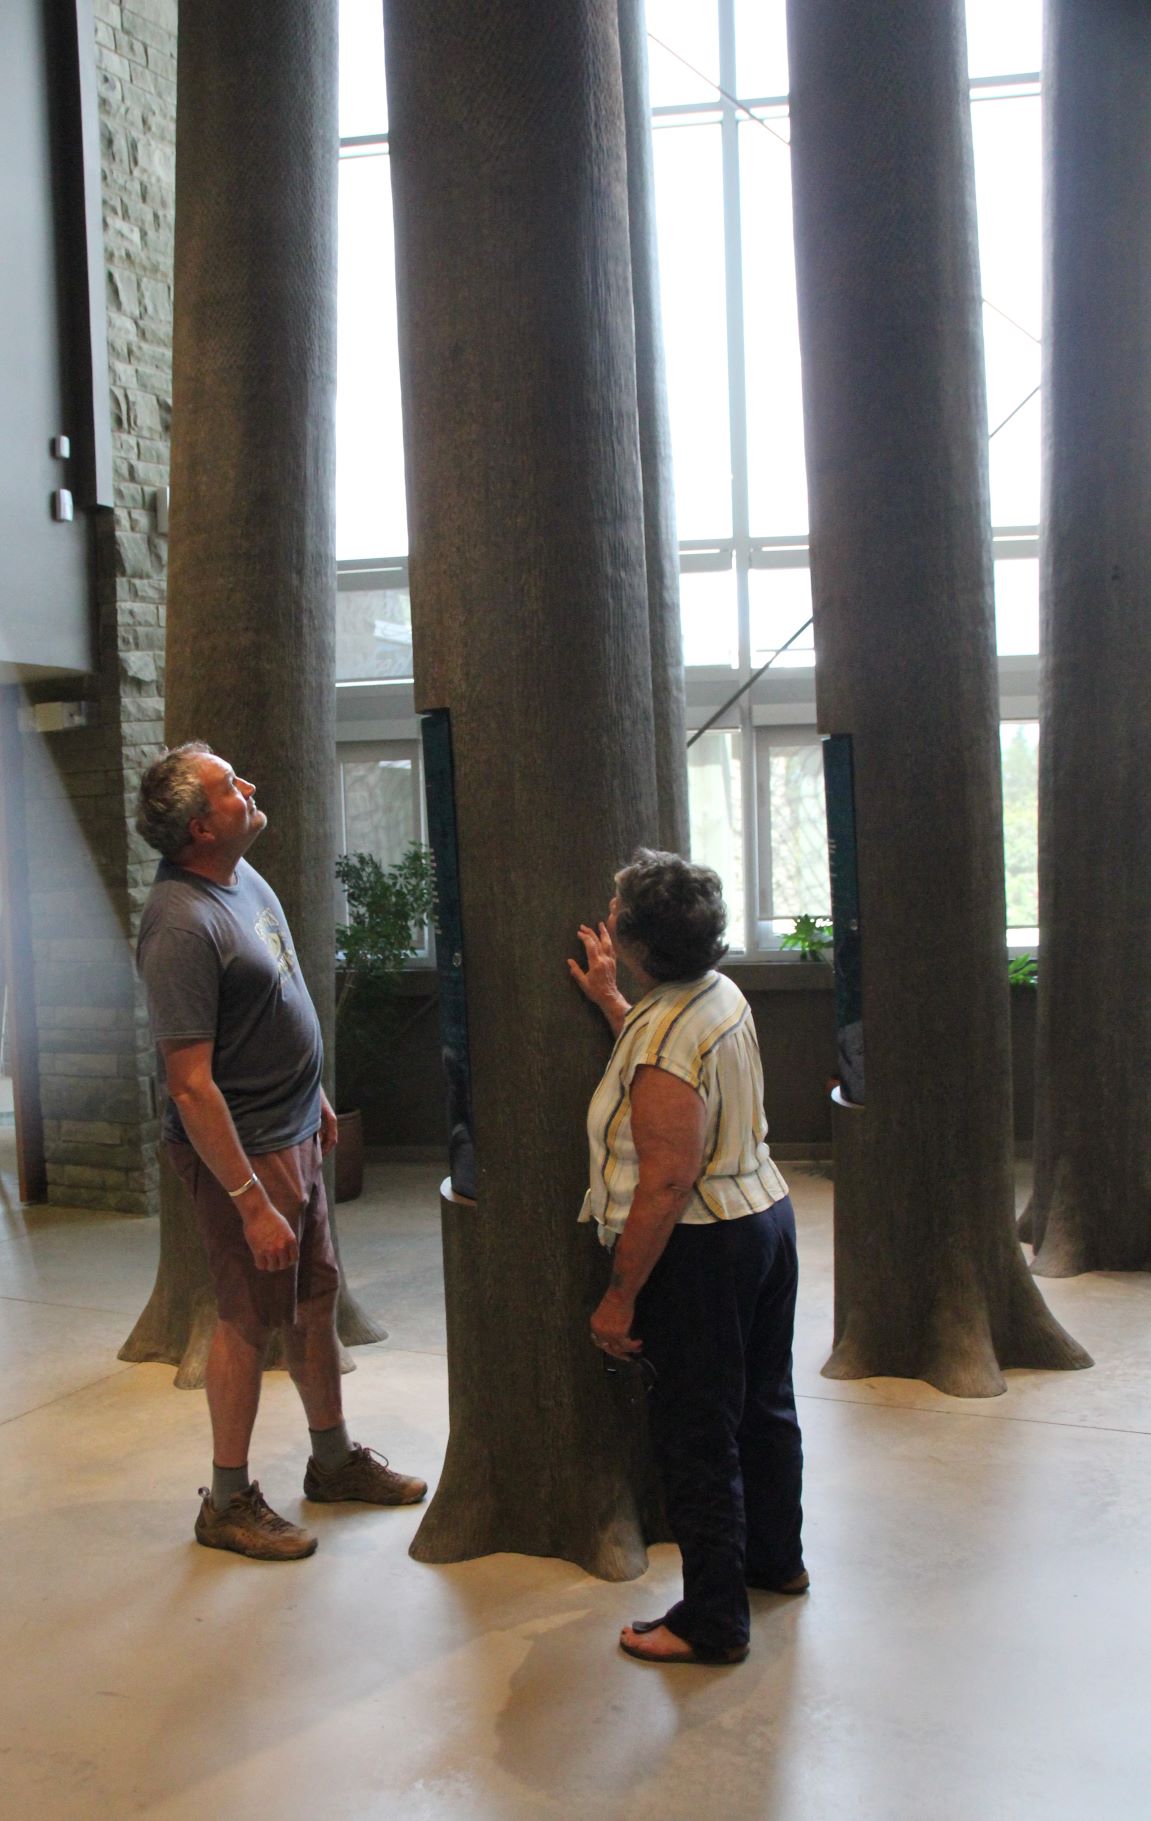 Darryl and Sandra in the museum looking at a tree trunk